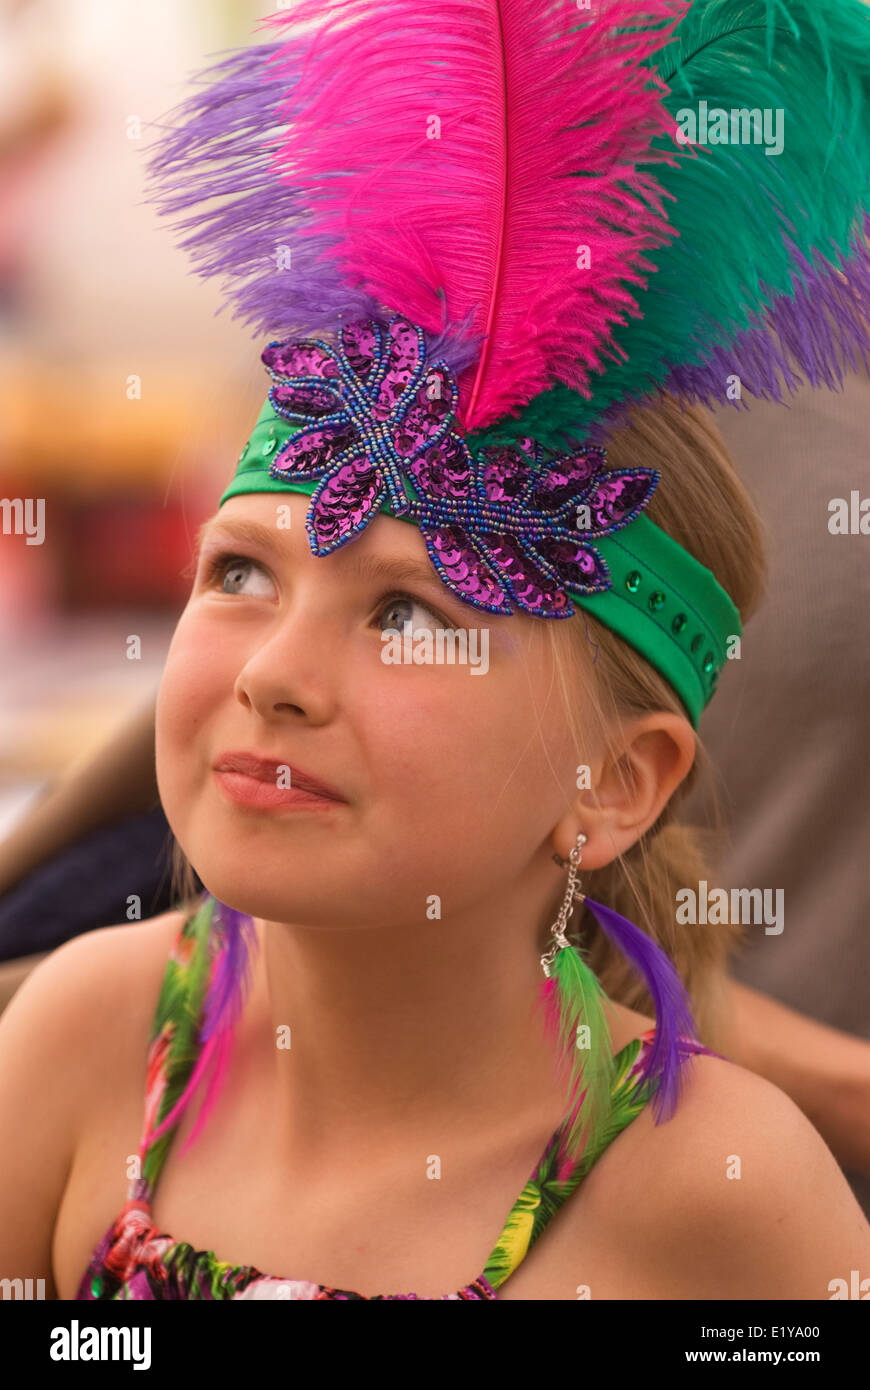 8 year old girl wearing Brazilian/carnival costume at a village summer ...